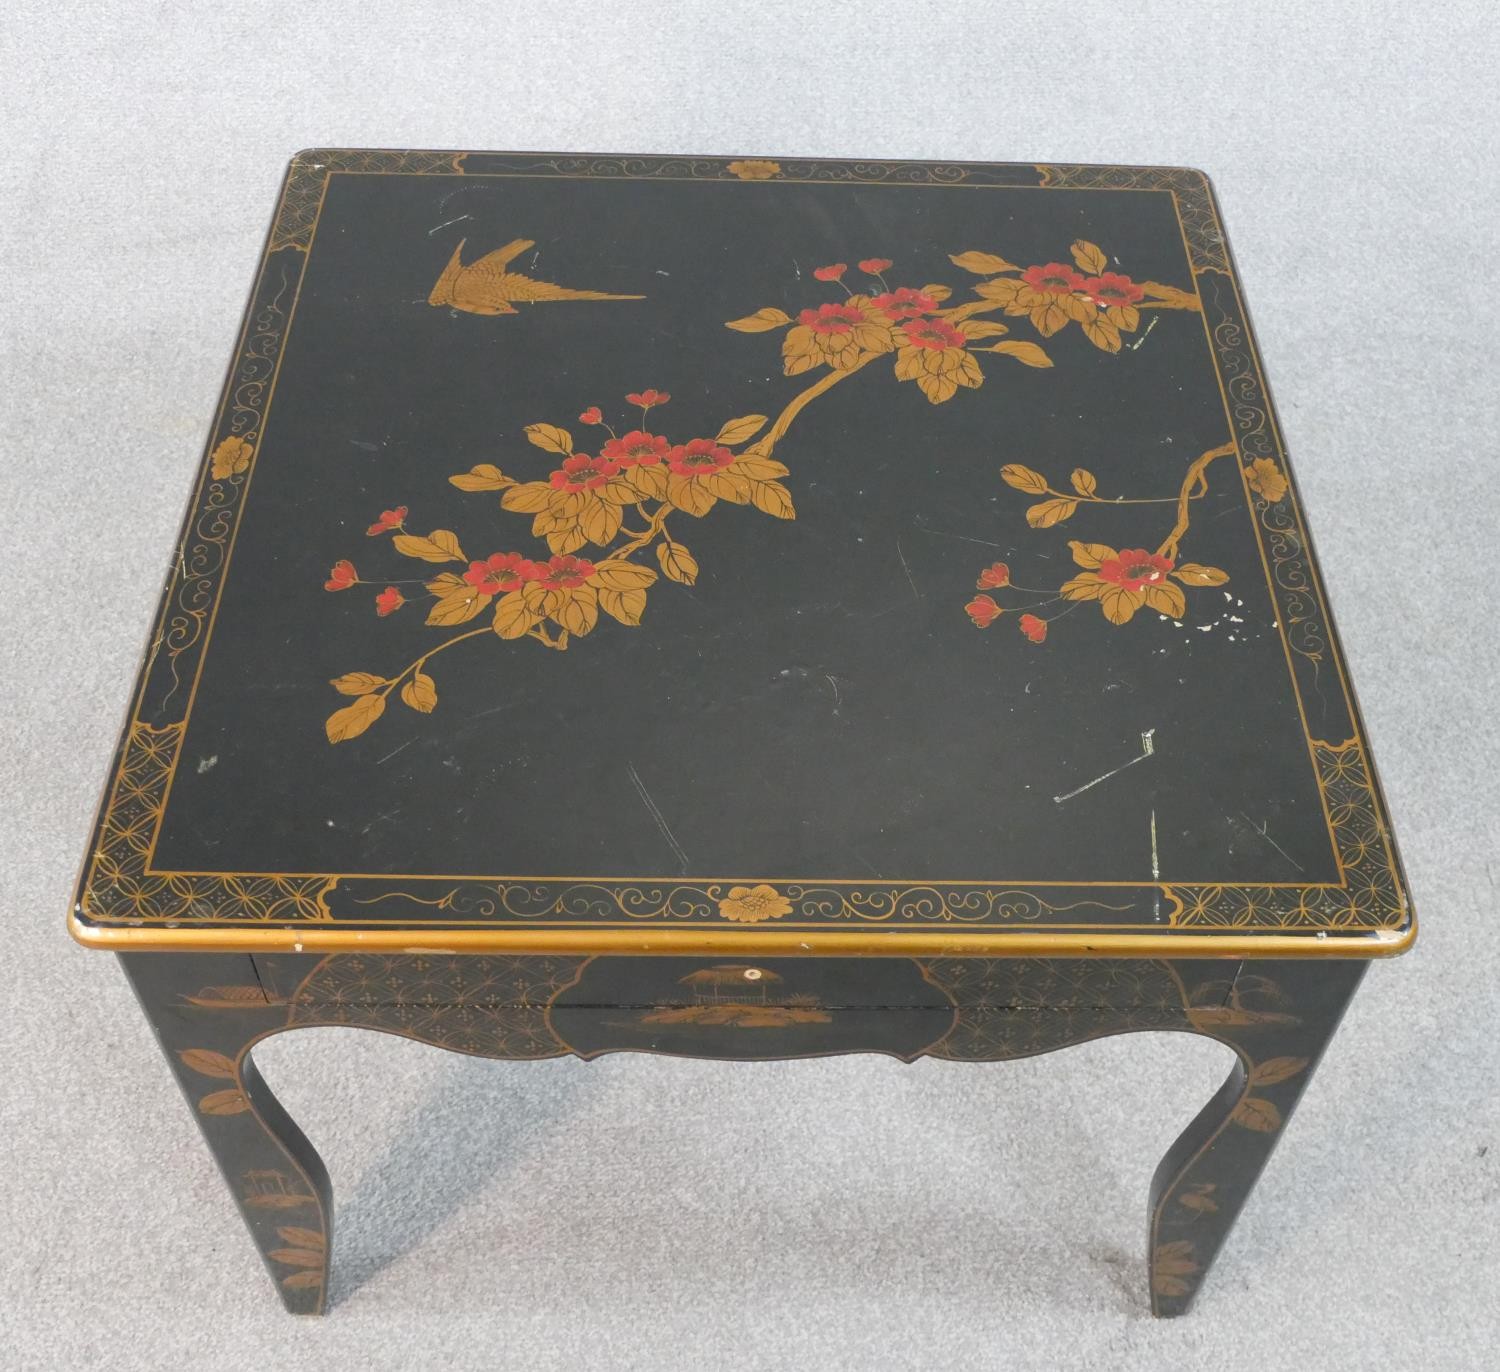 A black lacquered Chinese low table with hand gilded bird and blossom decoration. W.66 H.52 D.66cm - Image 2 of 6